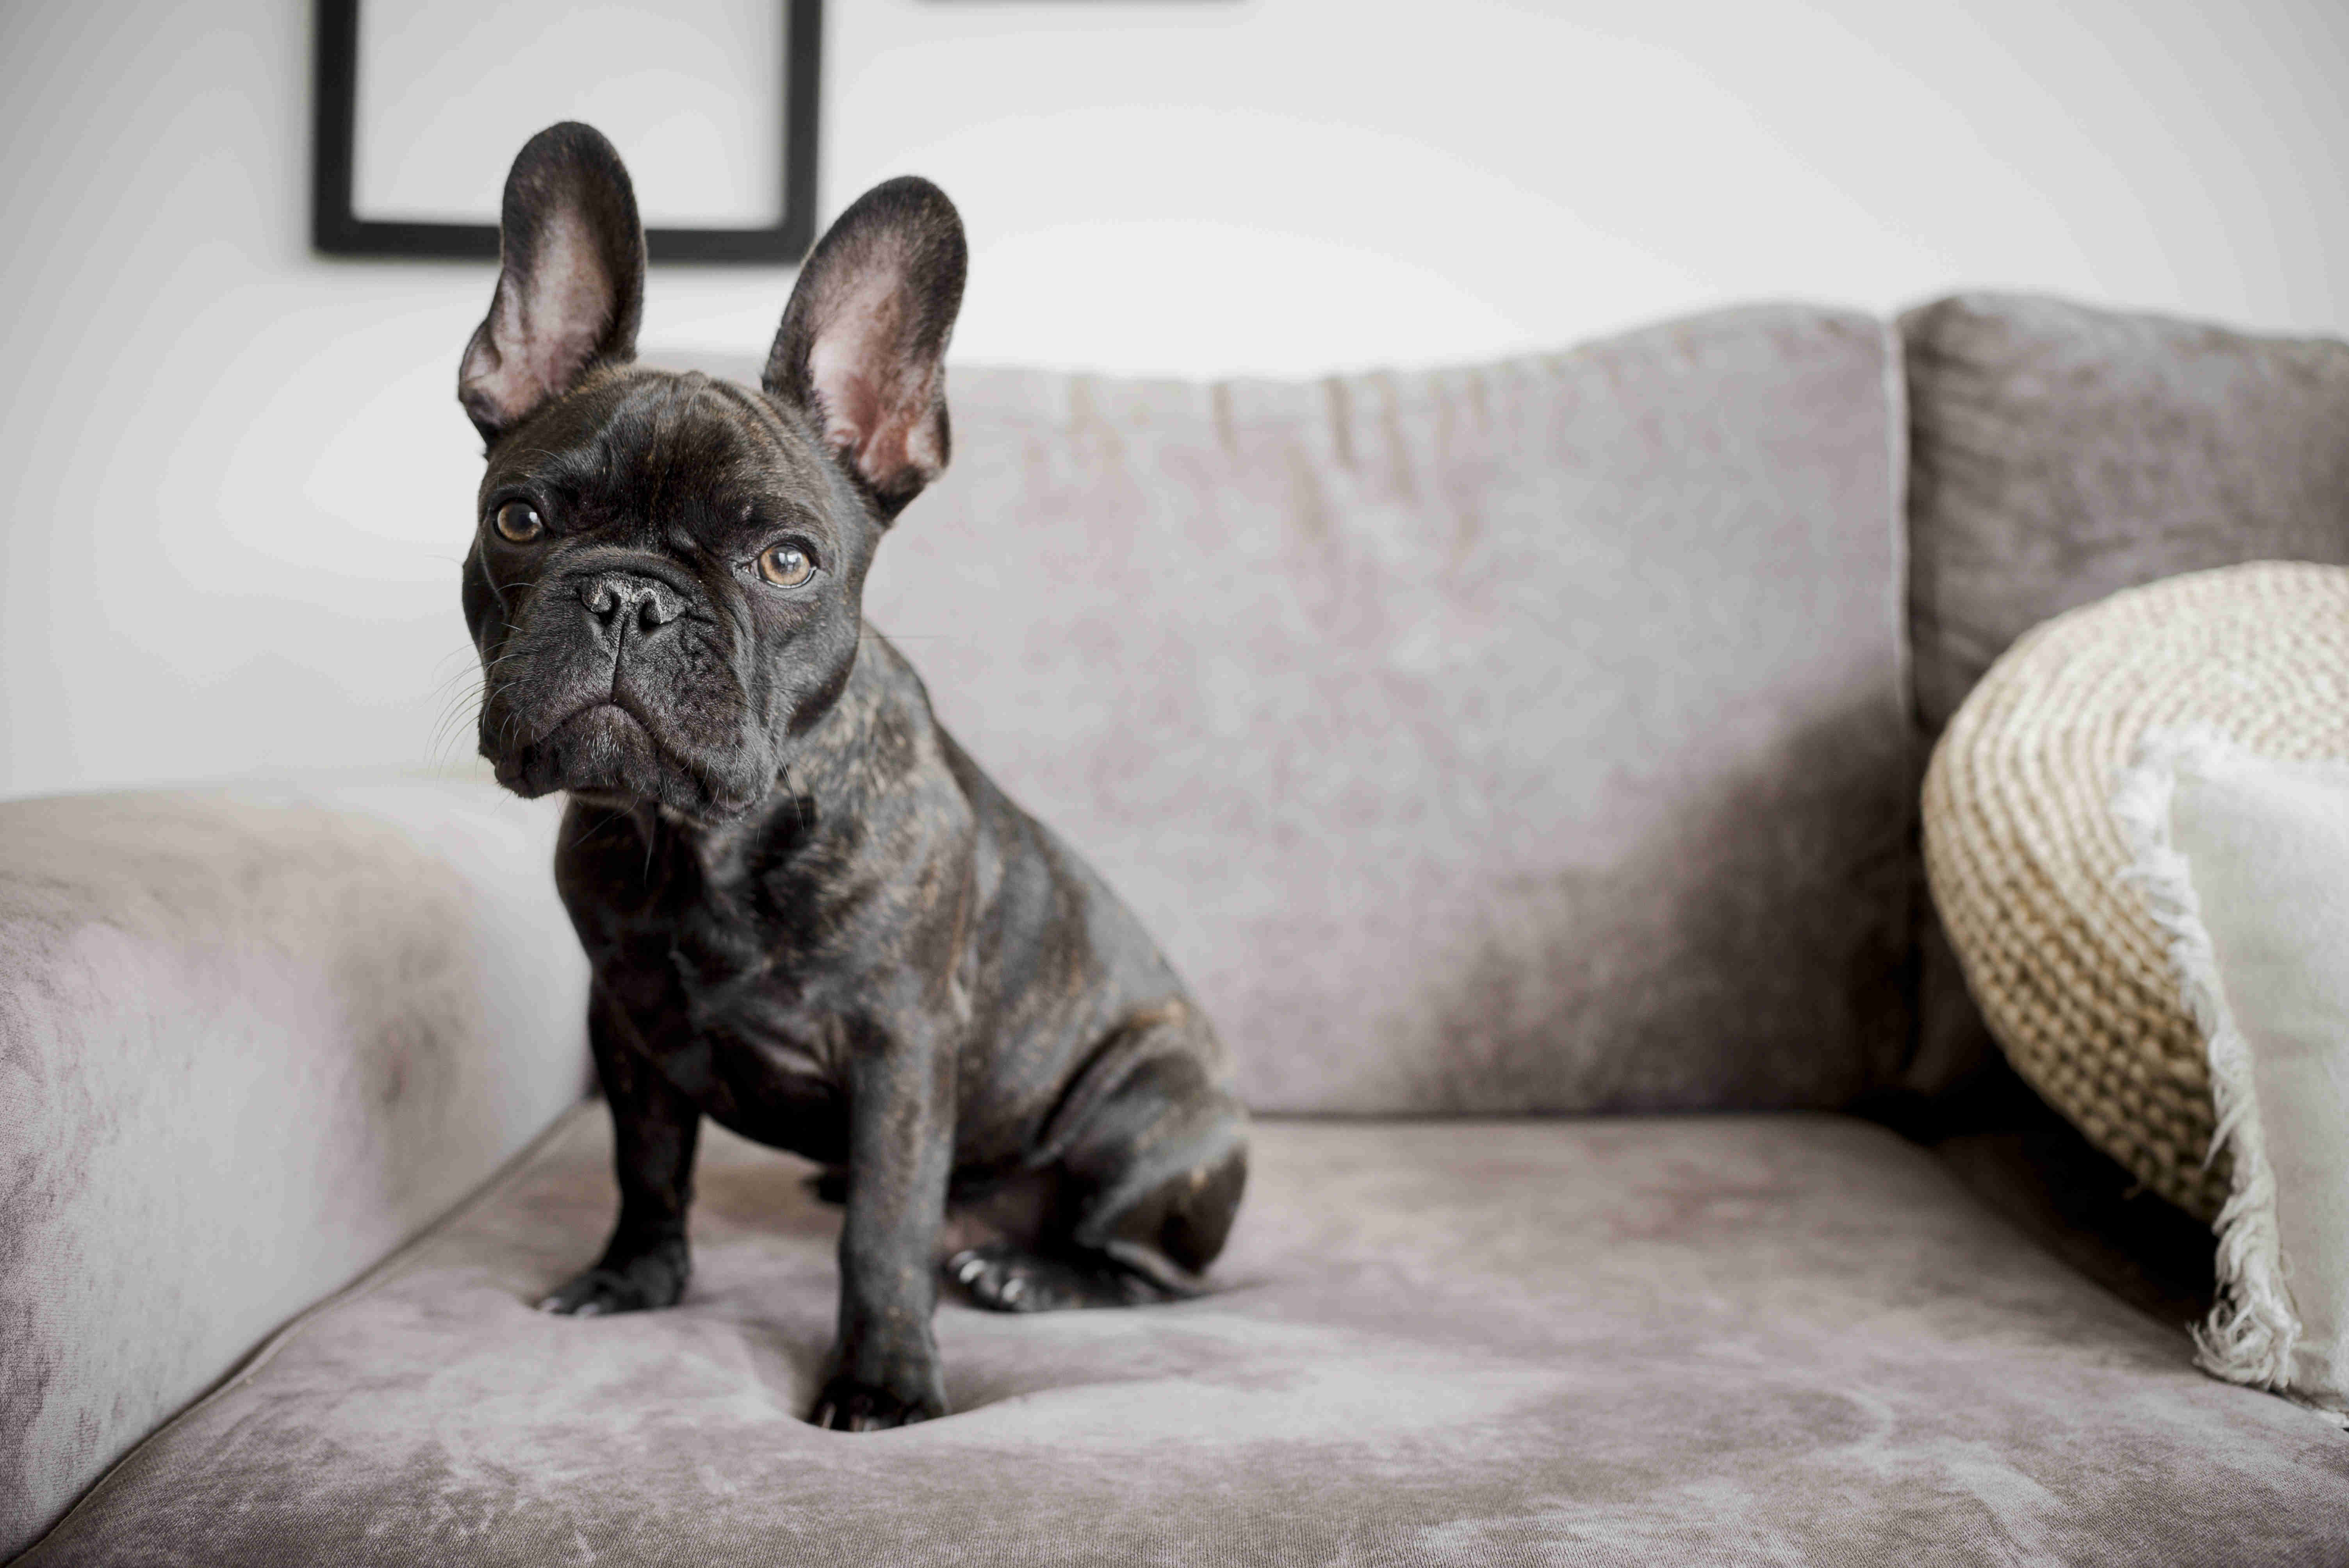 Training Your French Bulldog Puppy: Tips for Teaching Basic Commands